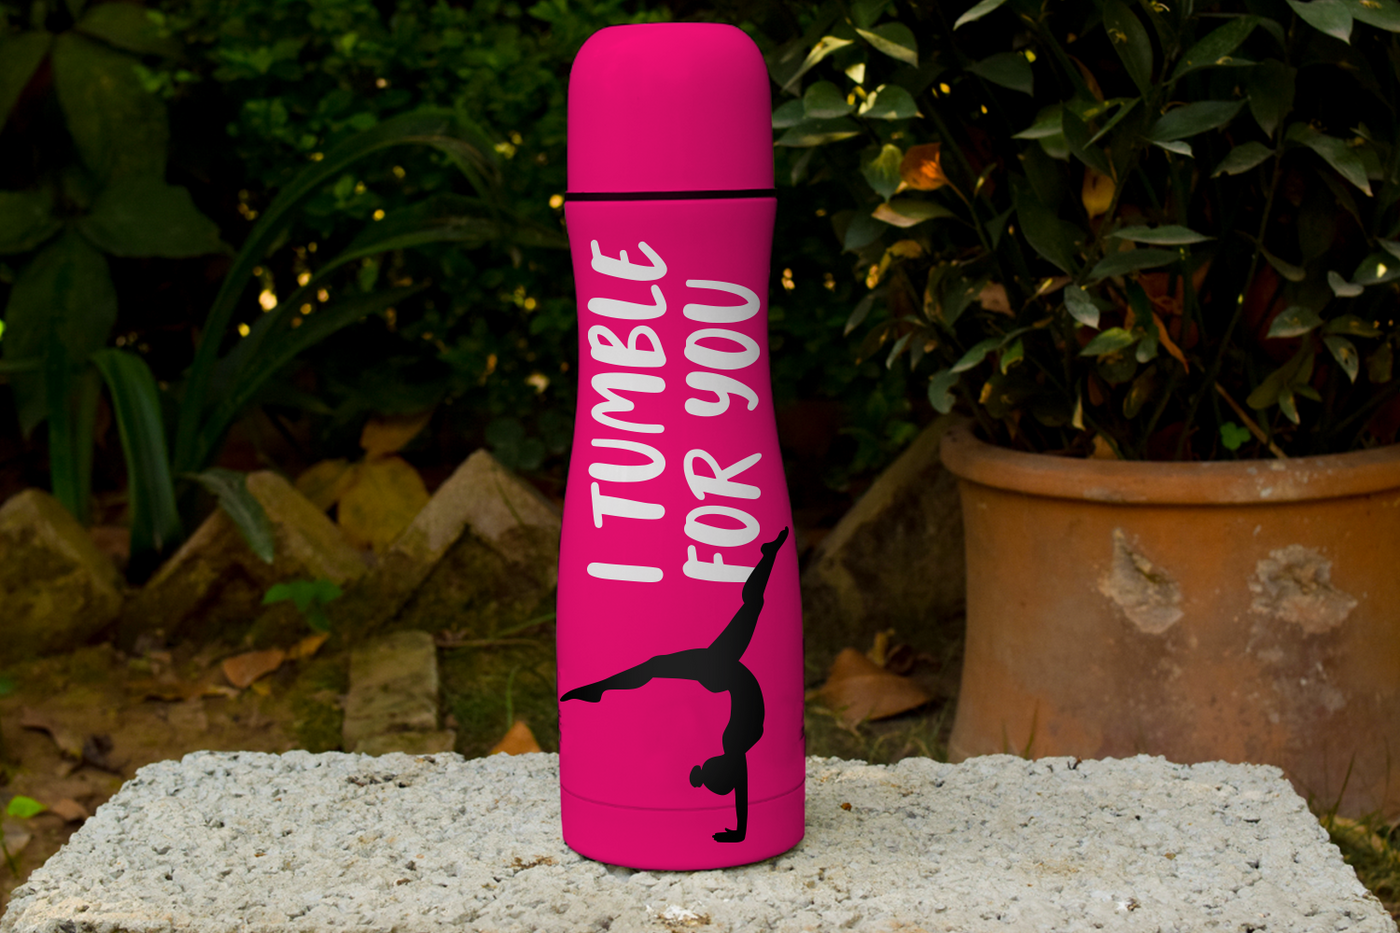 Water bottle with a tumbling gymnast and the words "I tumble for you"